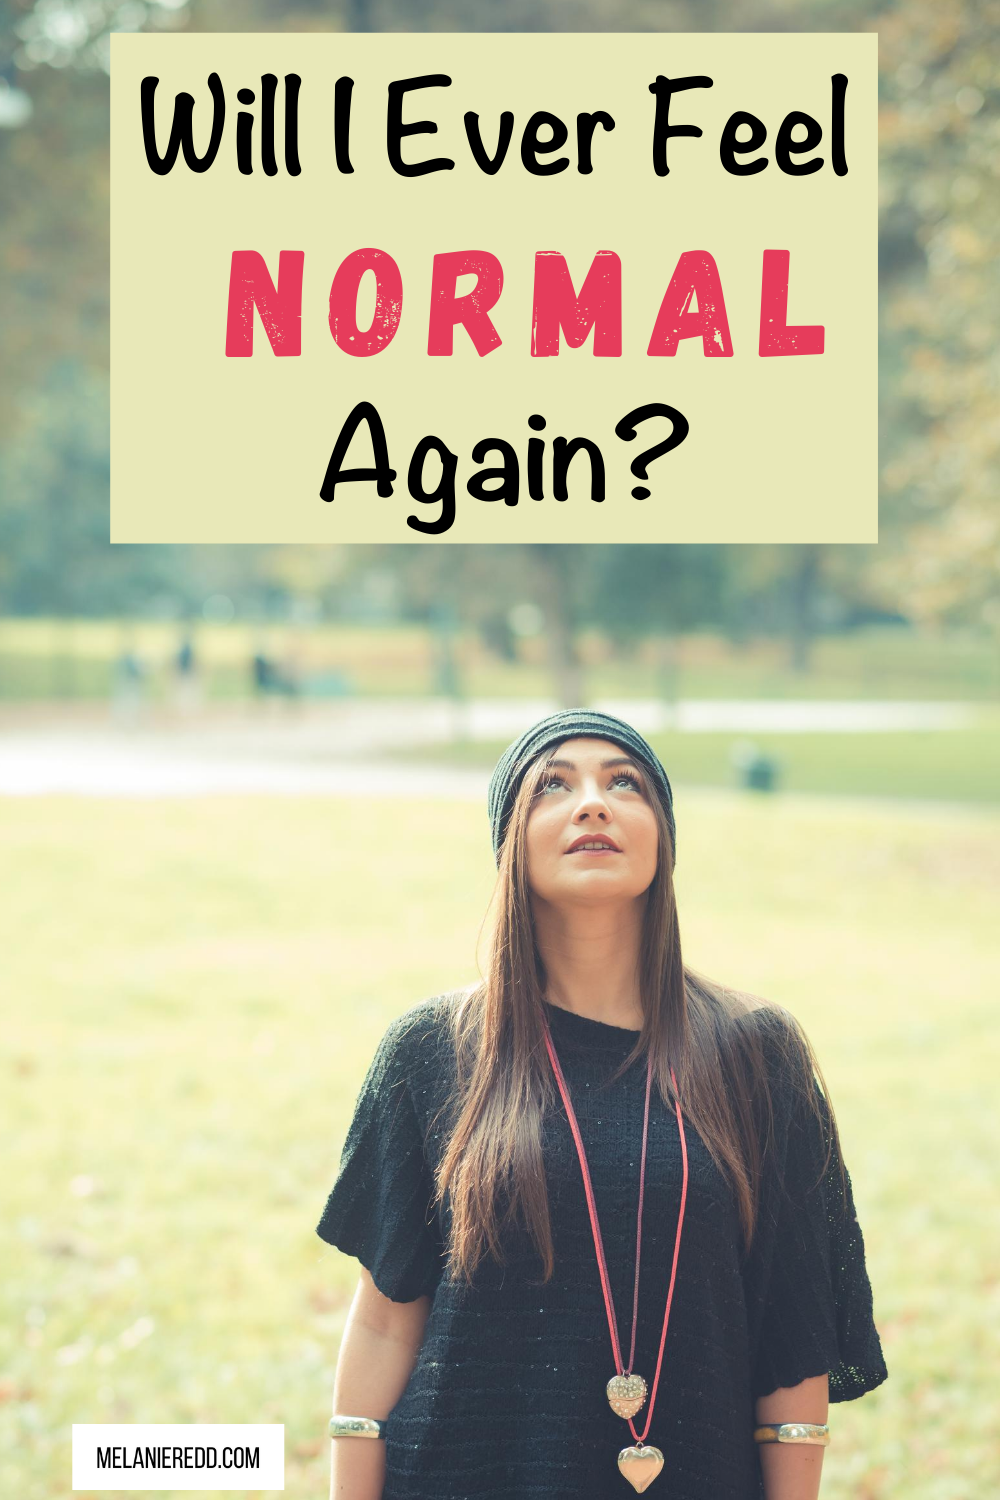 Do you find yourself wondering, Will I Ever Feel Normal Again? Whoever thought that feeling normal would be something we’d desire! But, we are living in that day. Why not drop by to get some very practical tips on how to bring aa little normalcy back into your world? #normal #normalcy #normalagain #regularlife #feelbetter